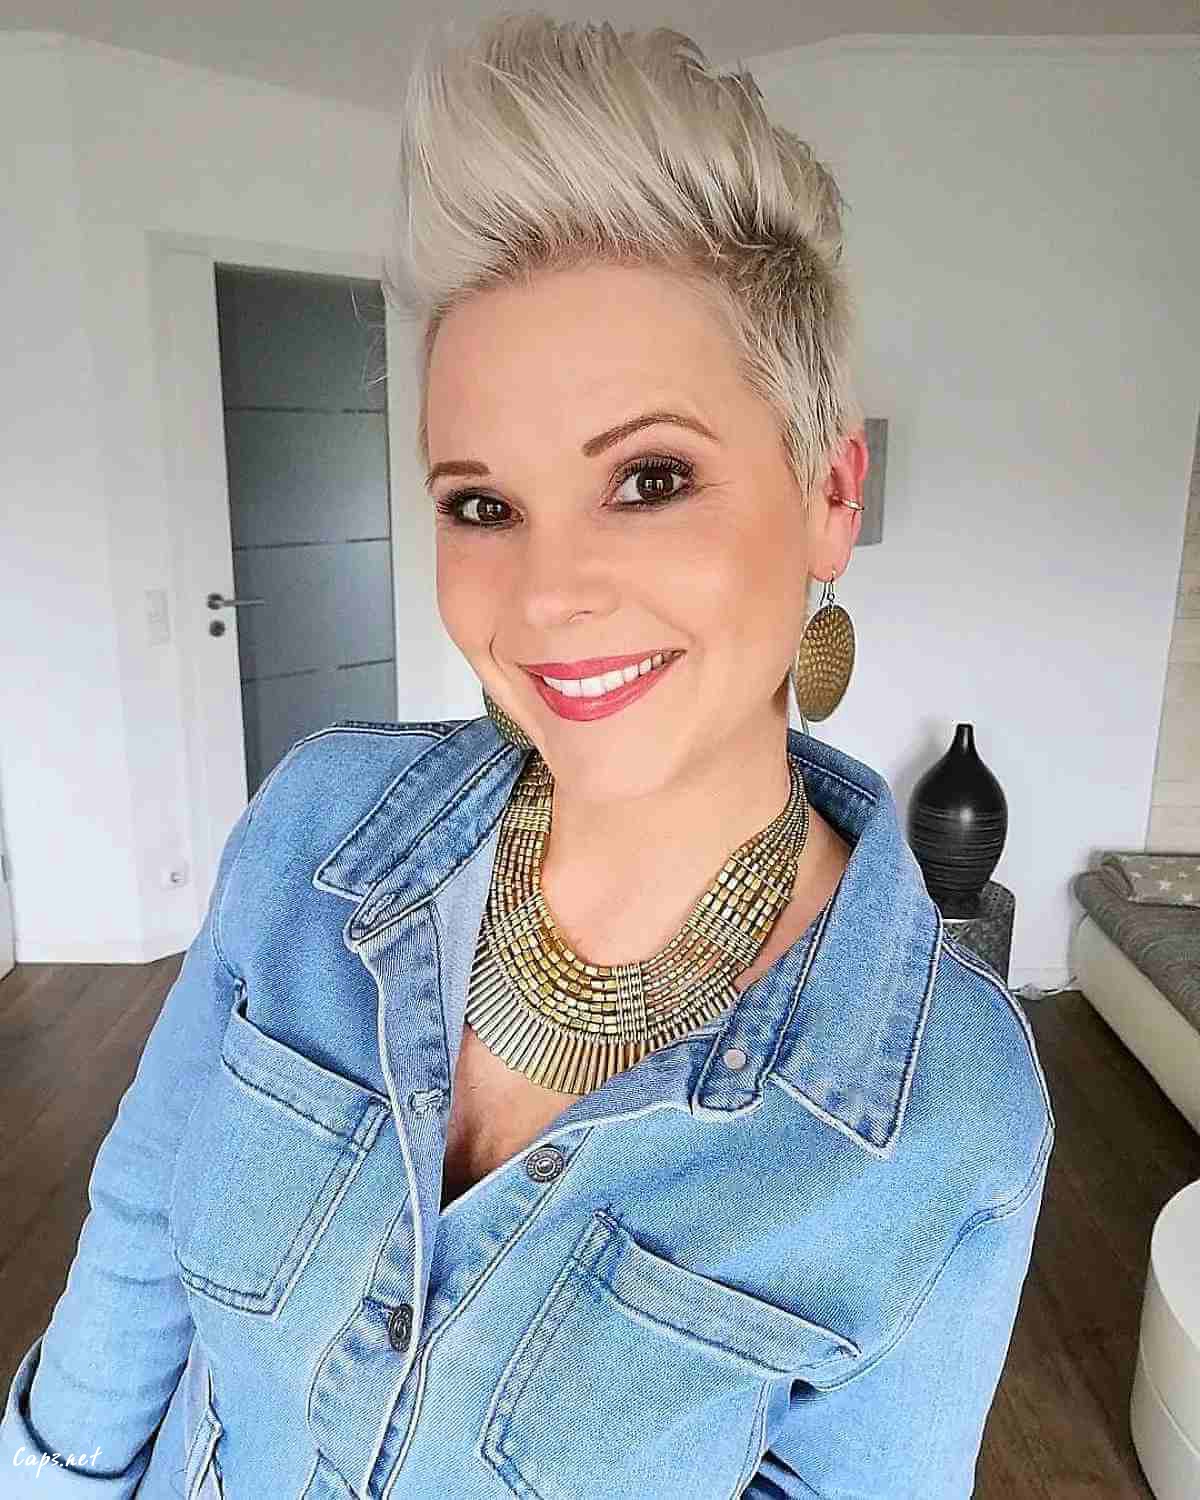 cool spiked pixie cut